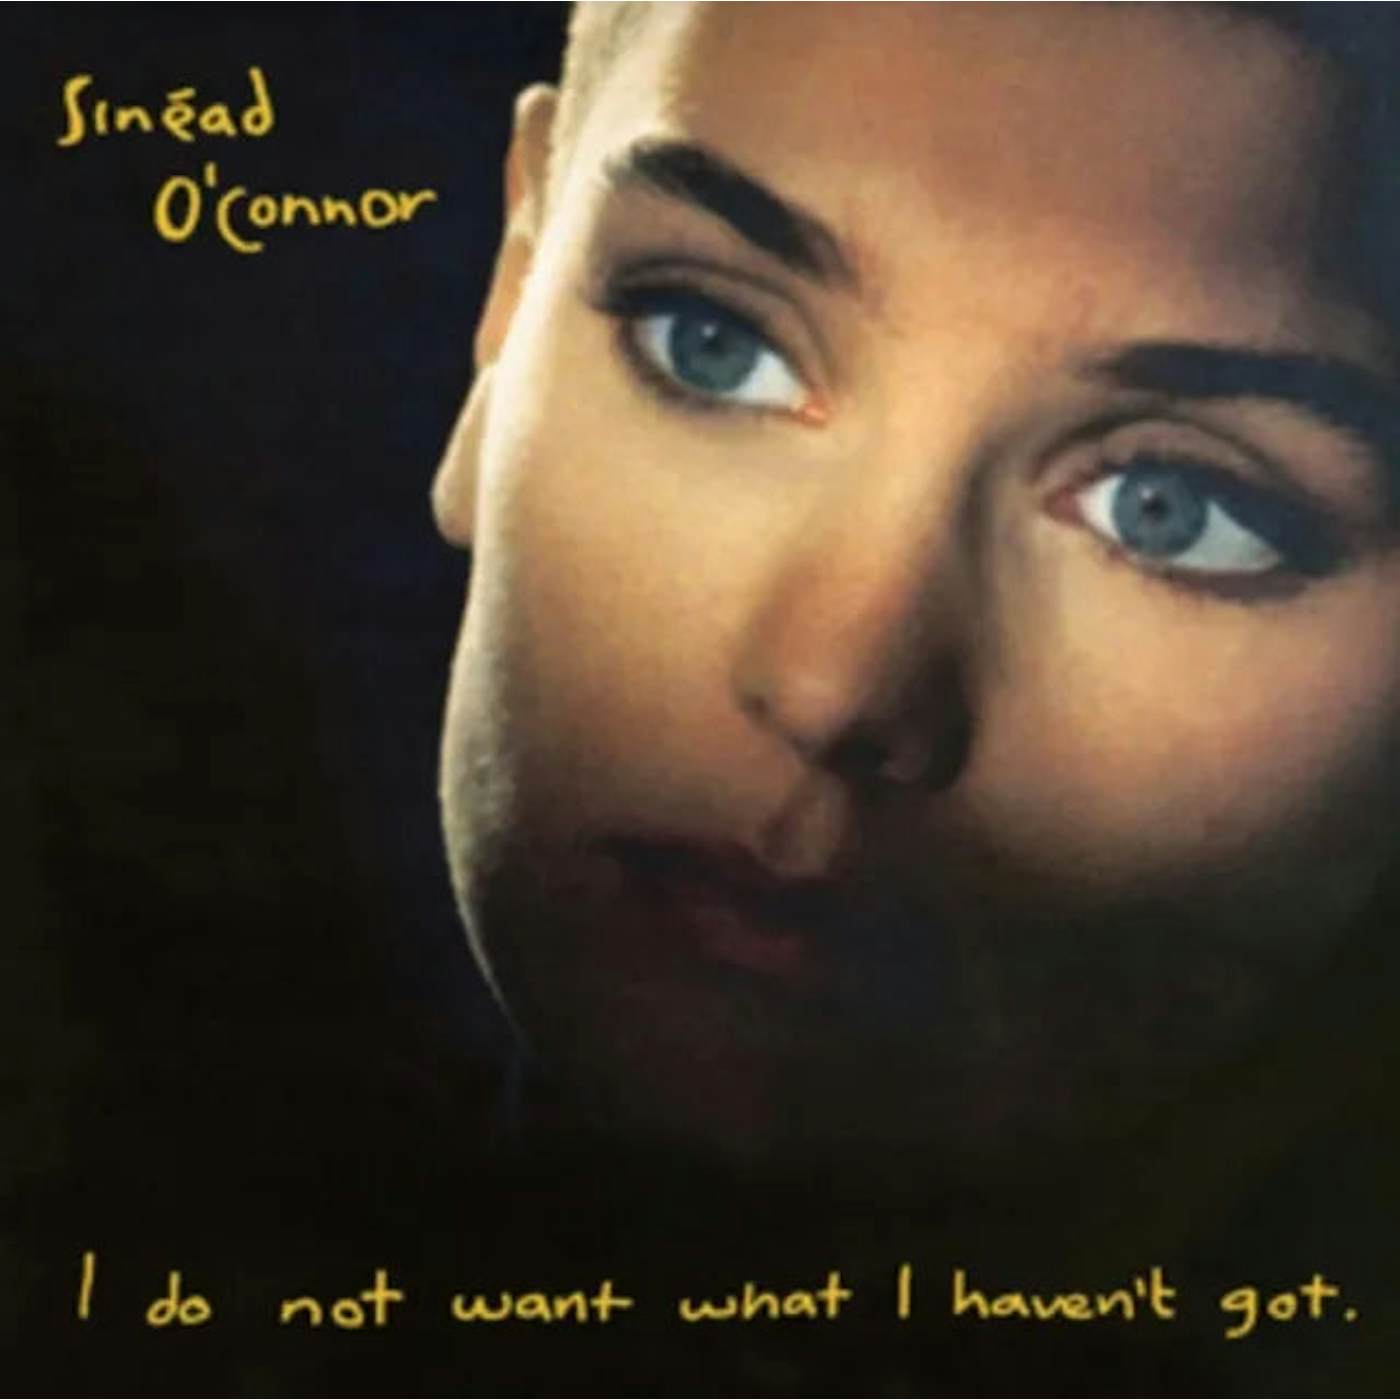 Sinéad O'Connor - I Do Not Want What I Havent (Vinyl)